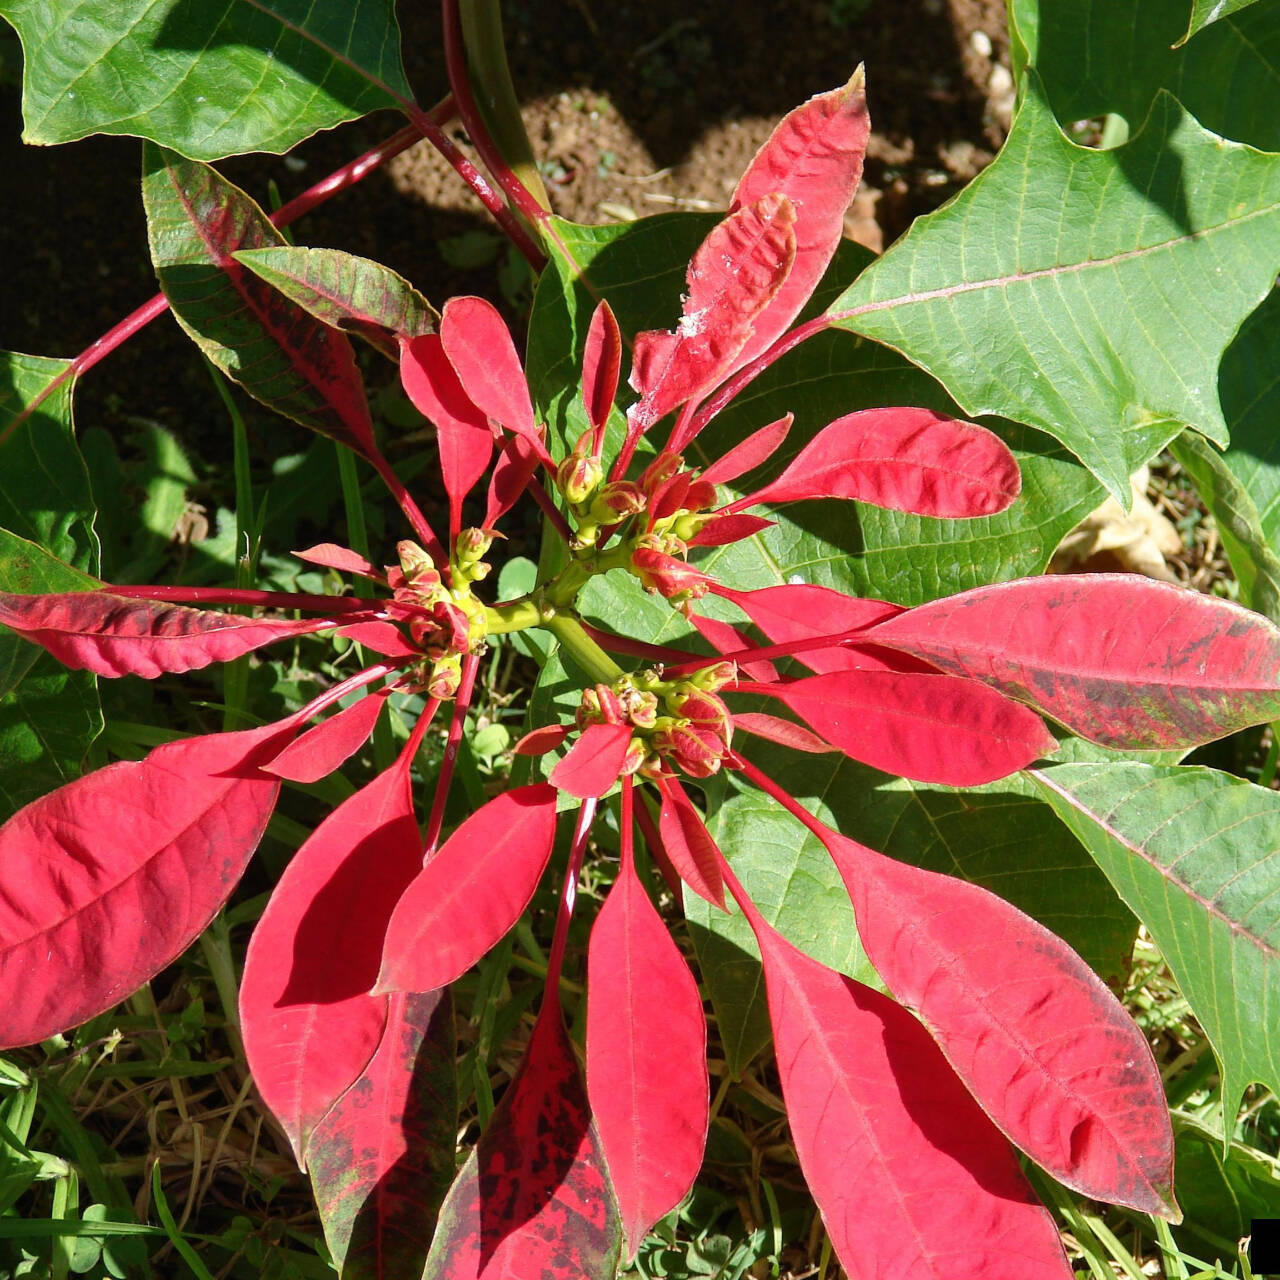 Photo by Forest and Kim Starr, Starr Environmental, Bugwood.org
A poinsettia flower is shown here in the wild, with small red bracts. The plant is a large shrub reaching 10-feet tall.